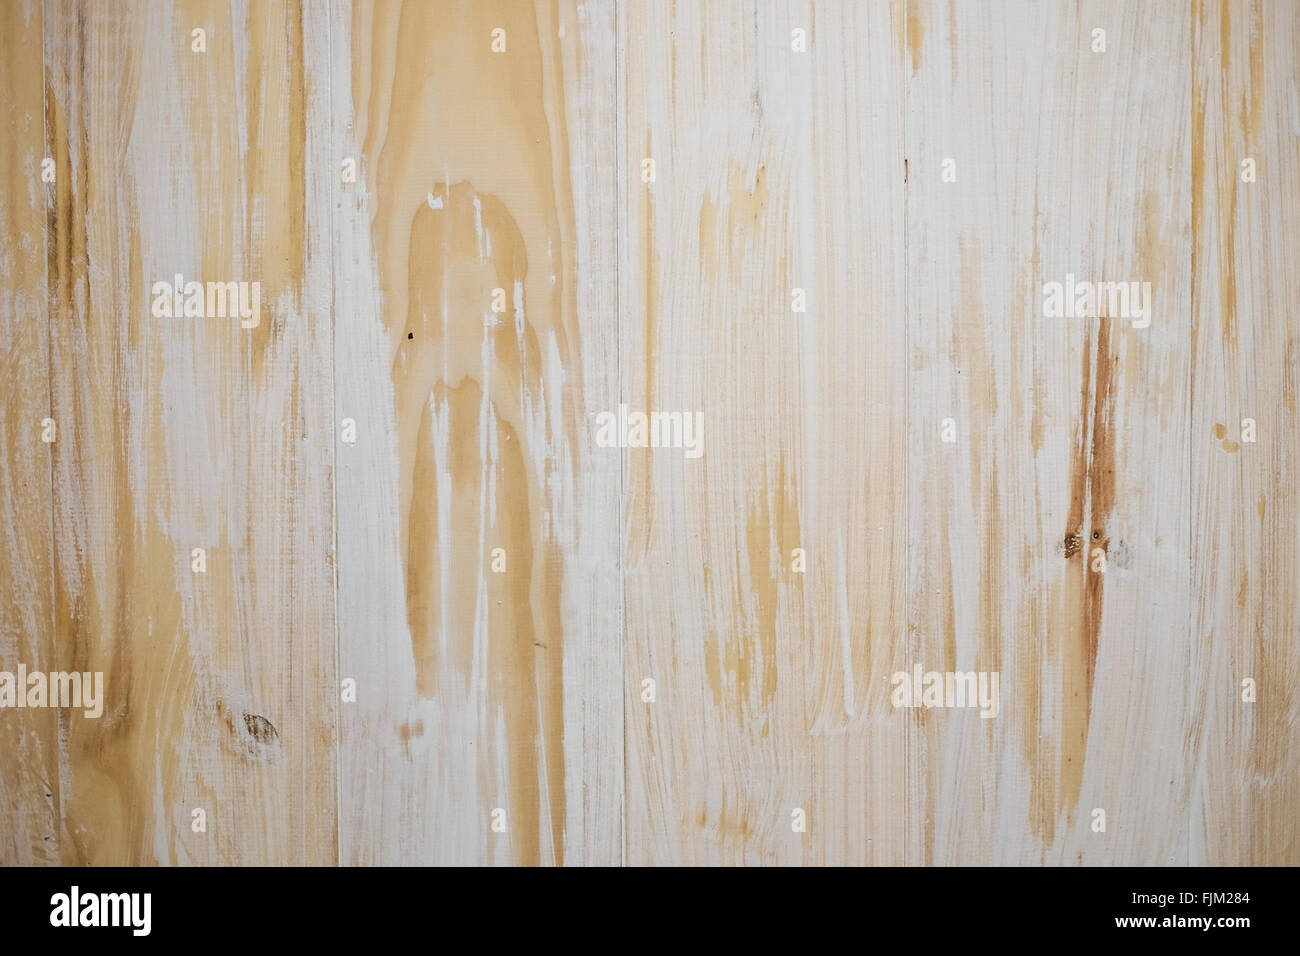 Texture of wooden plank wall background Stock Photo